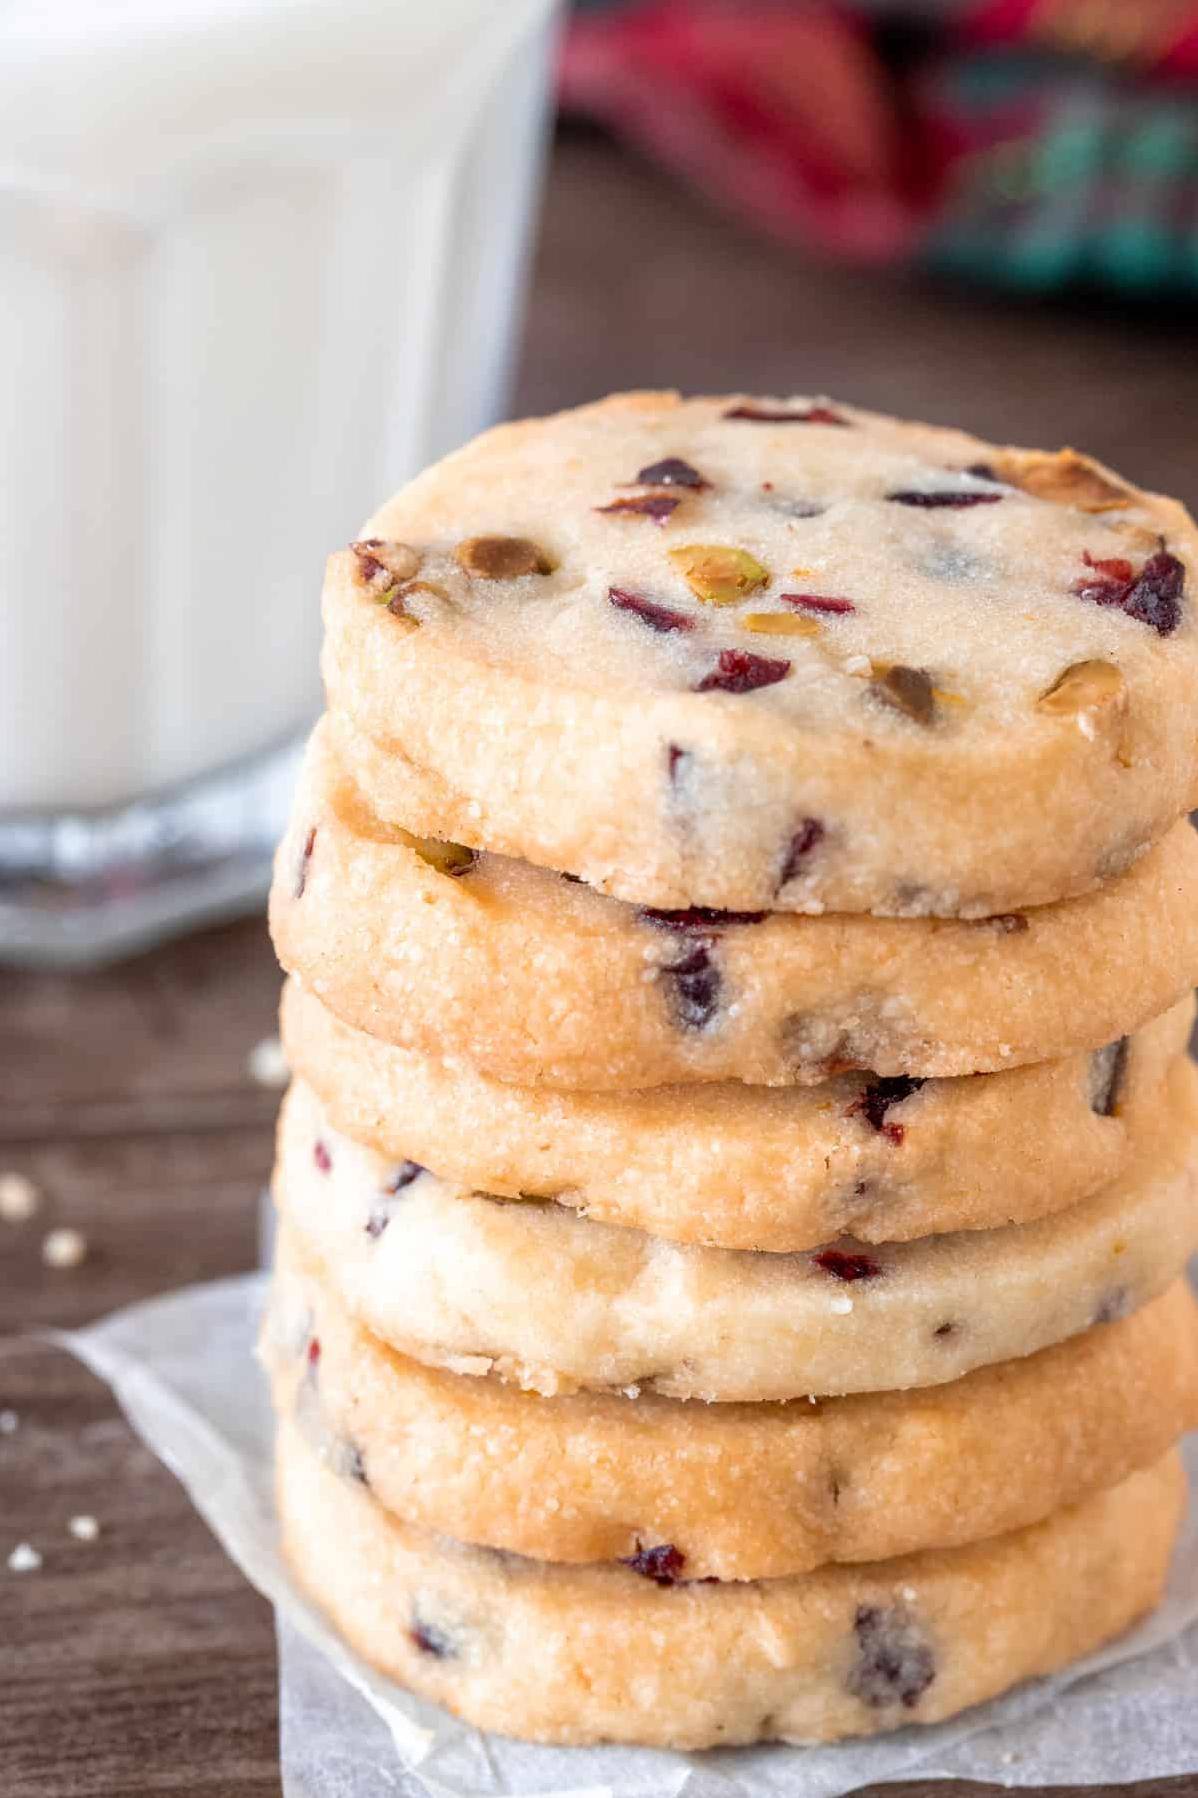  Bite into these heavenly shortbread cookies filled with tangy cranberries and crunchy pistachios.